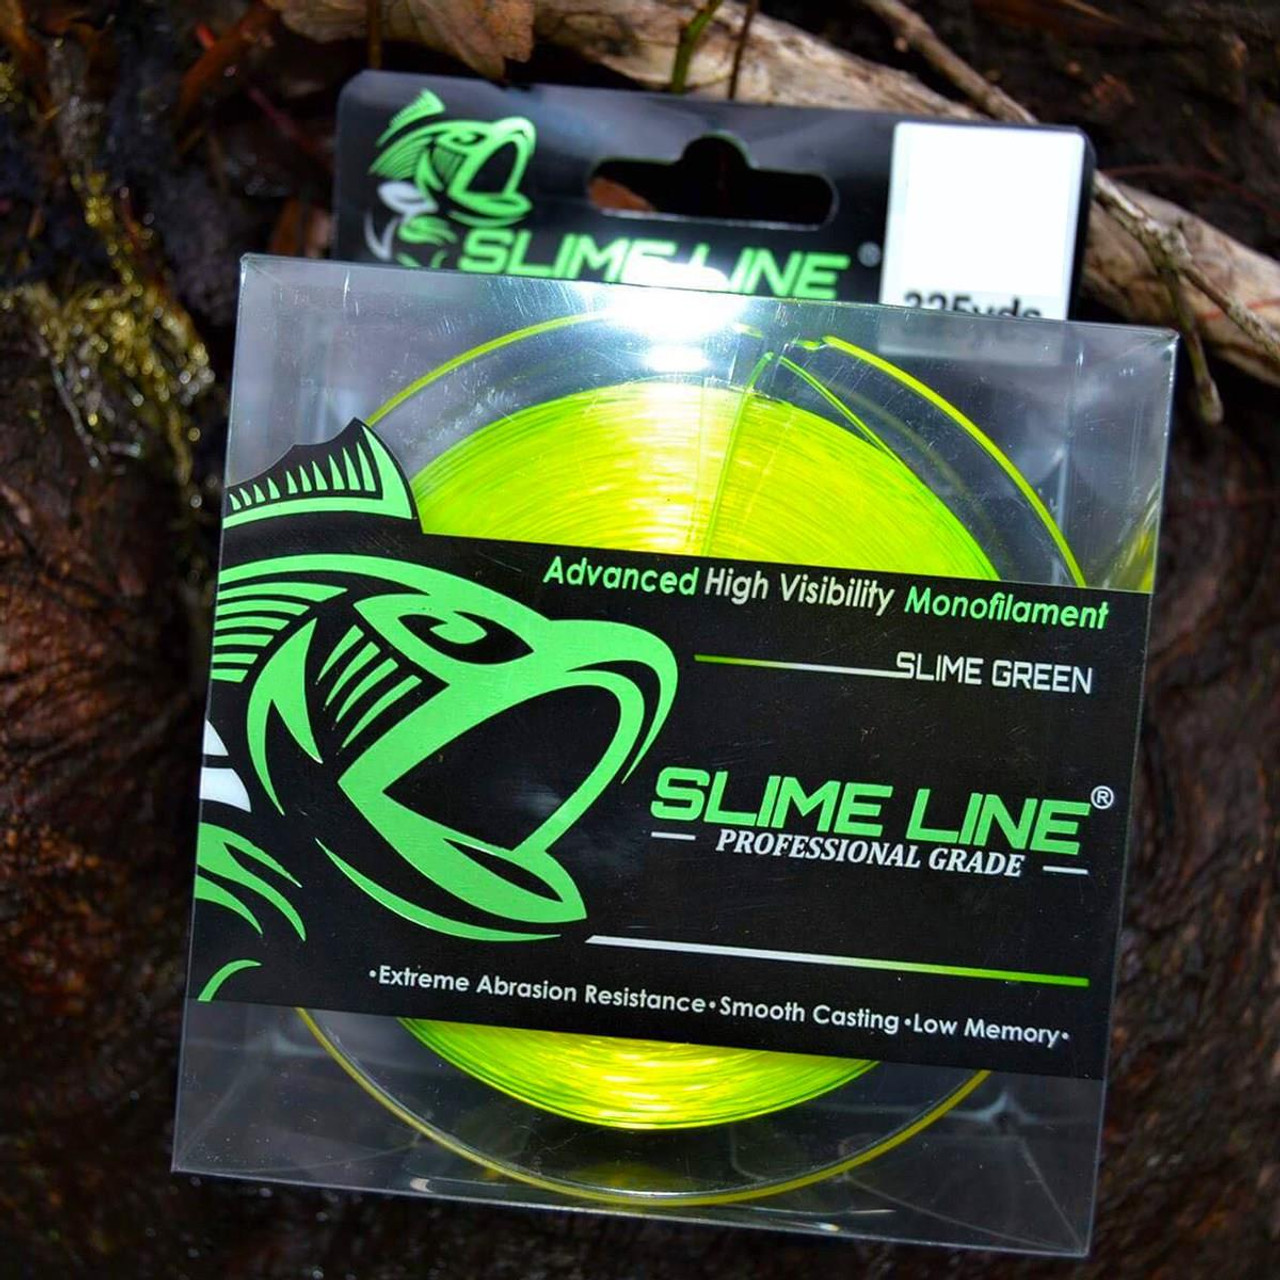 Slime Line Fishing Line - Welcome to the future of extreme high